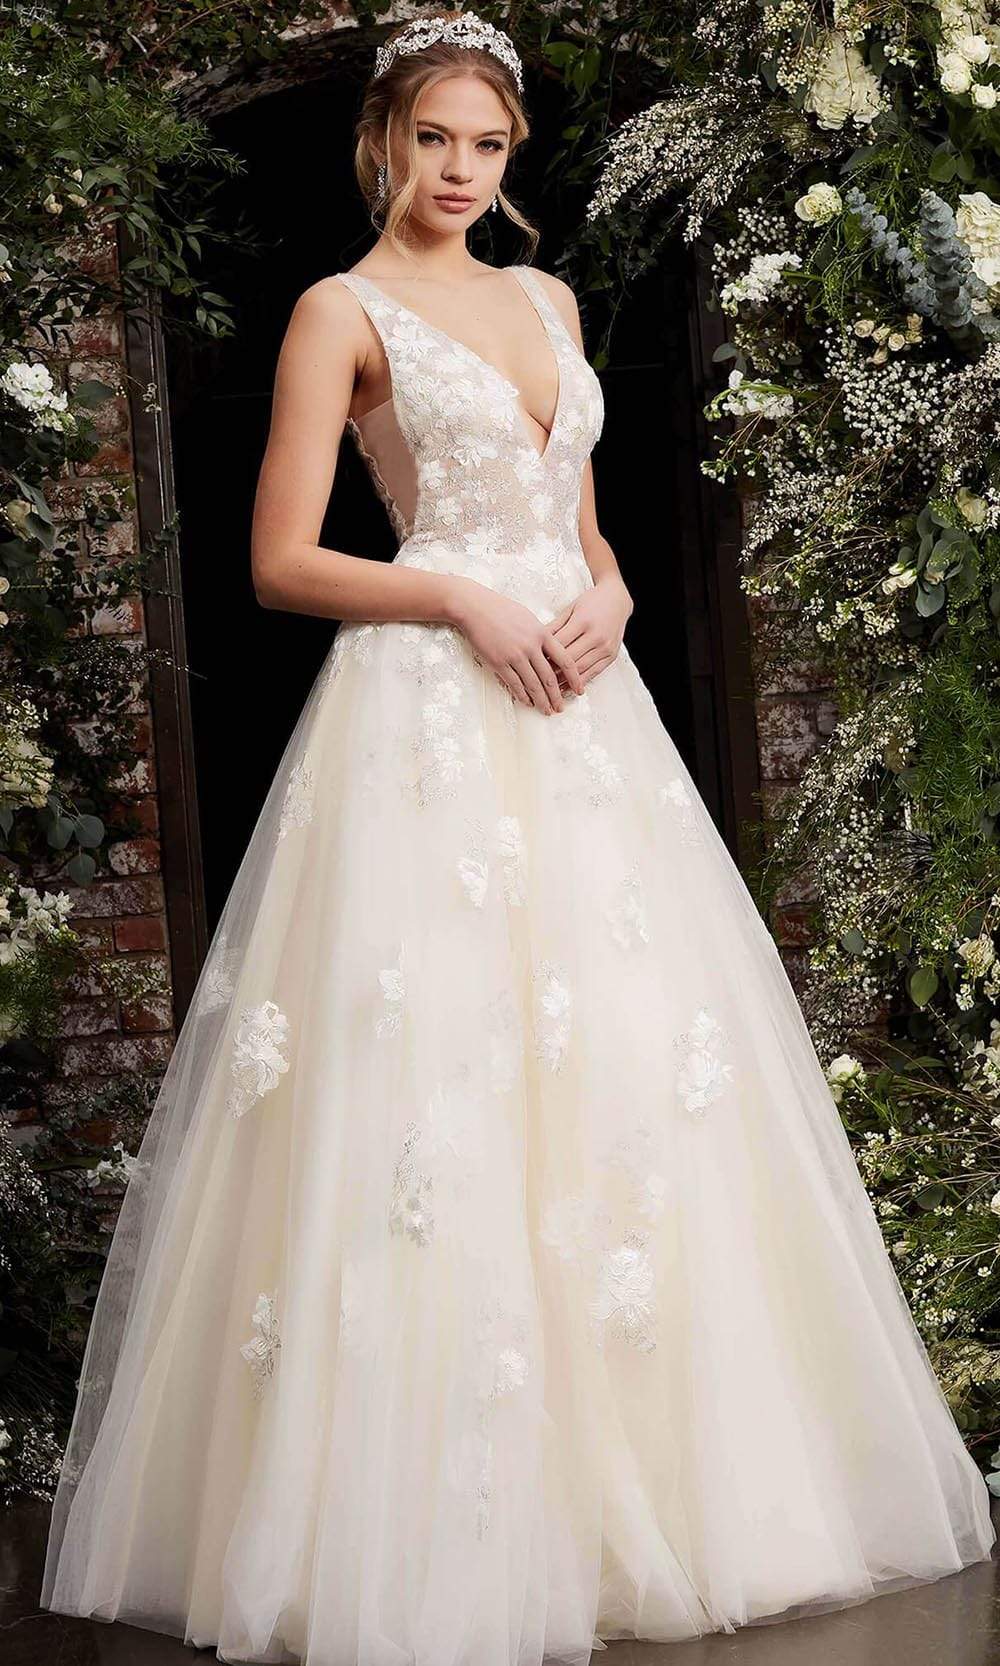 Image of Jovani - 06286 Sheer Floral Applique Bodice Tulle Ballgown